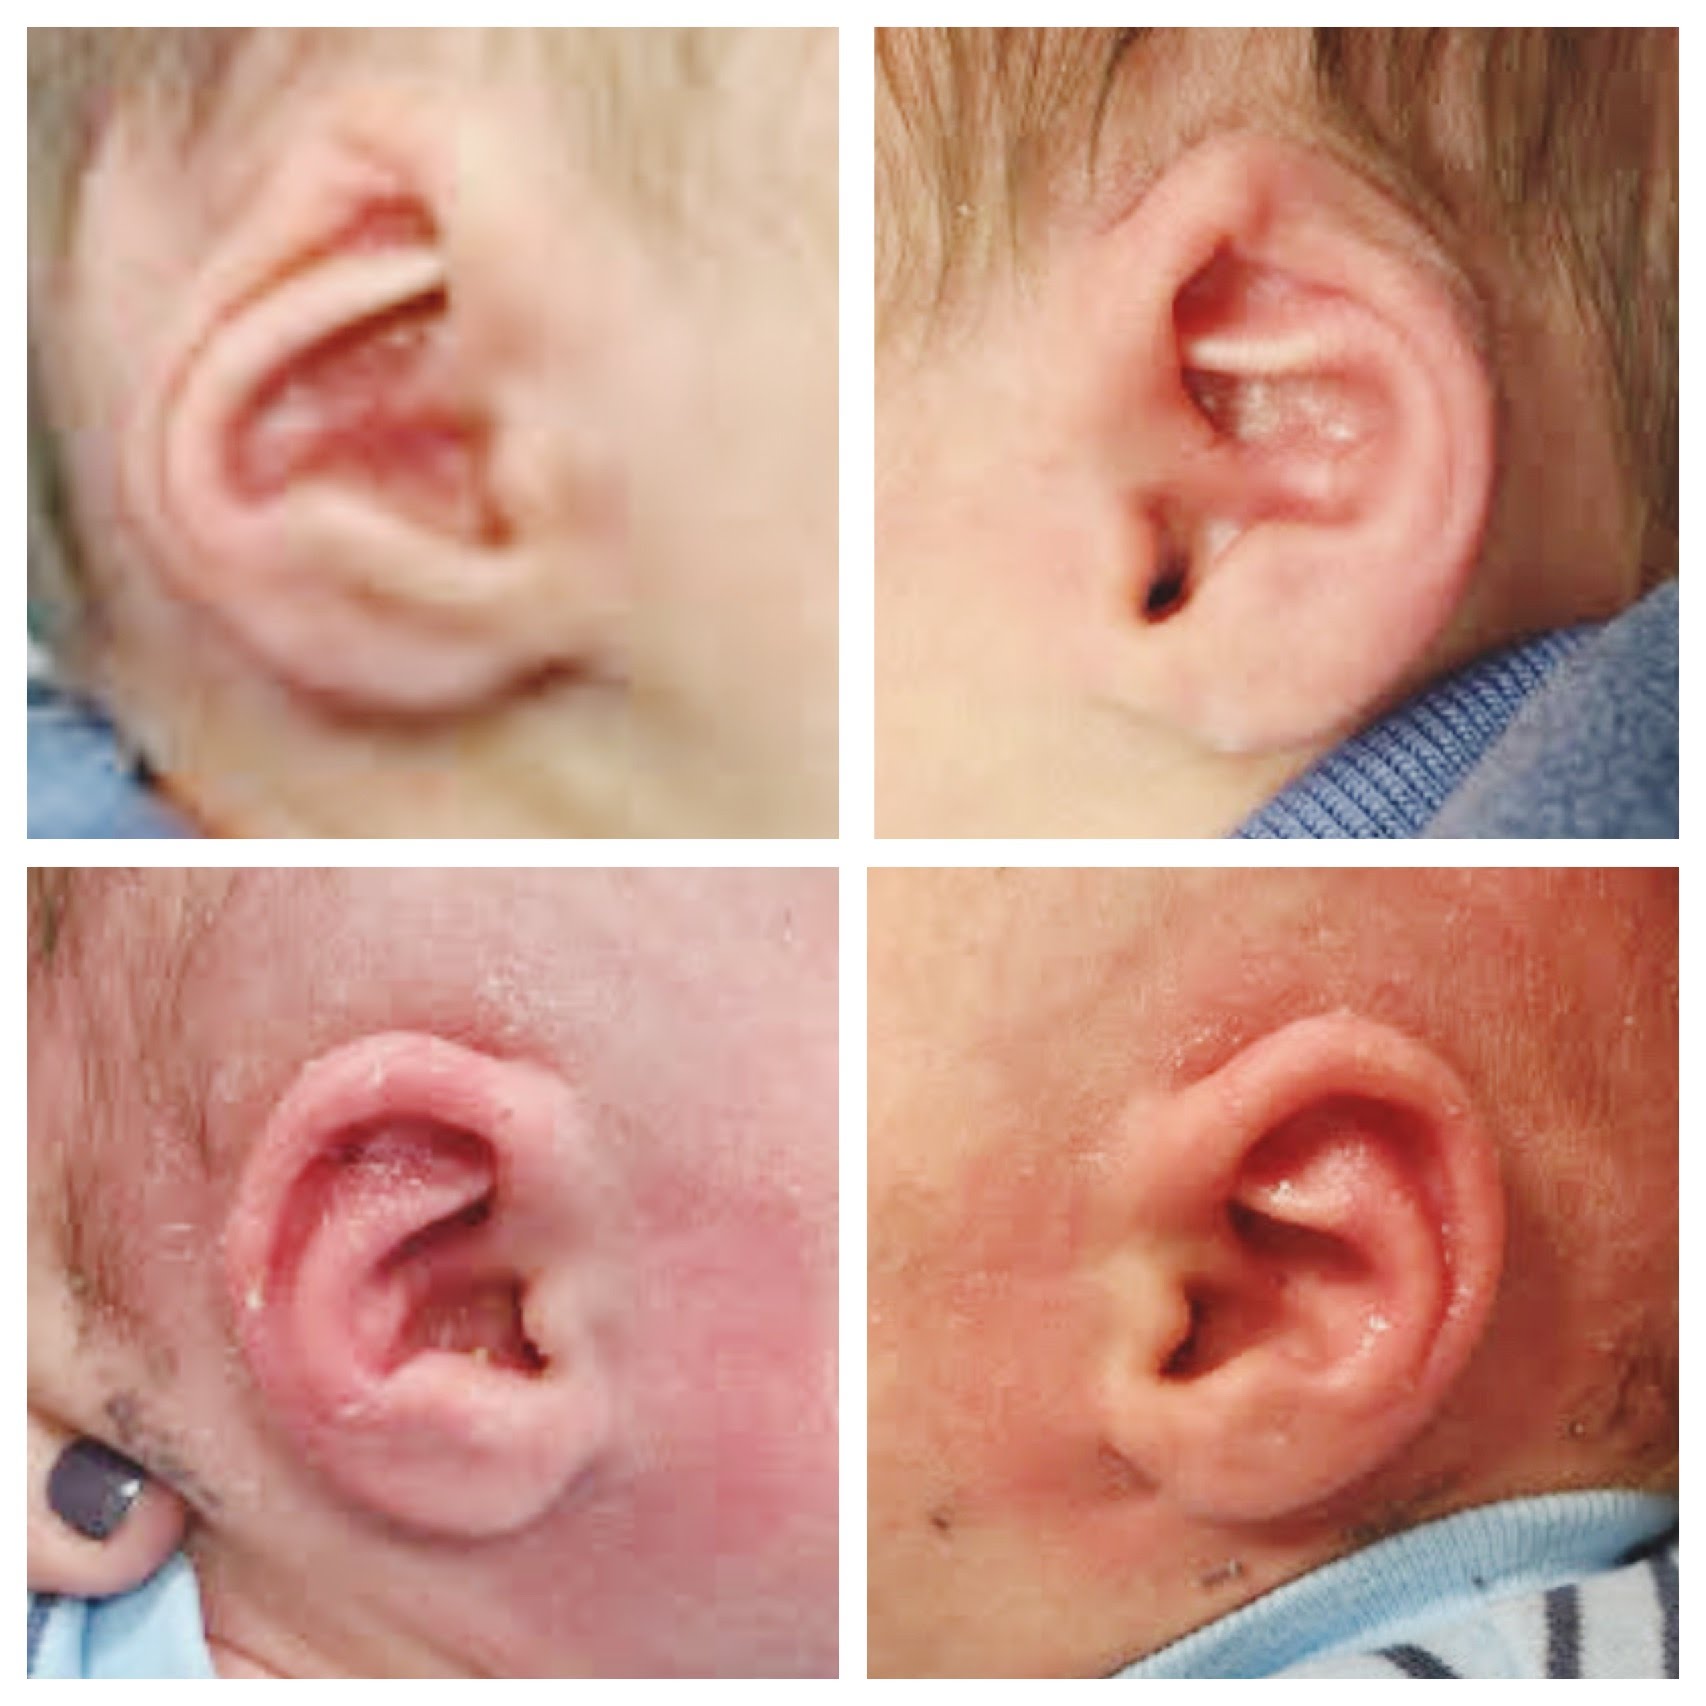 Ear molding is a non-surgical correction for congenital ear deformities in infants to restore normal ear anatomy.